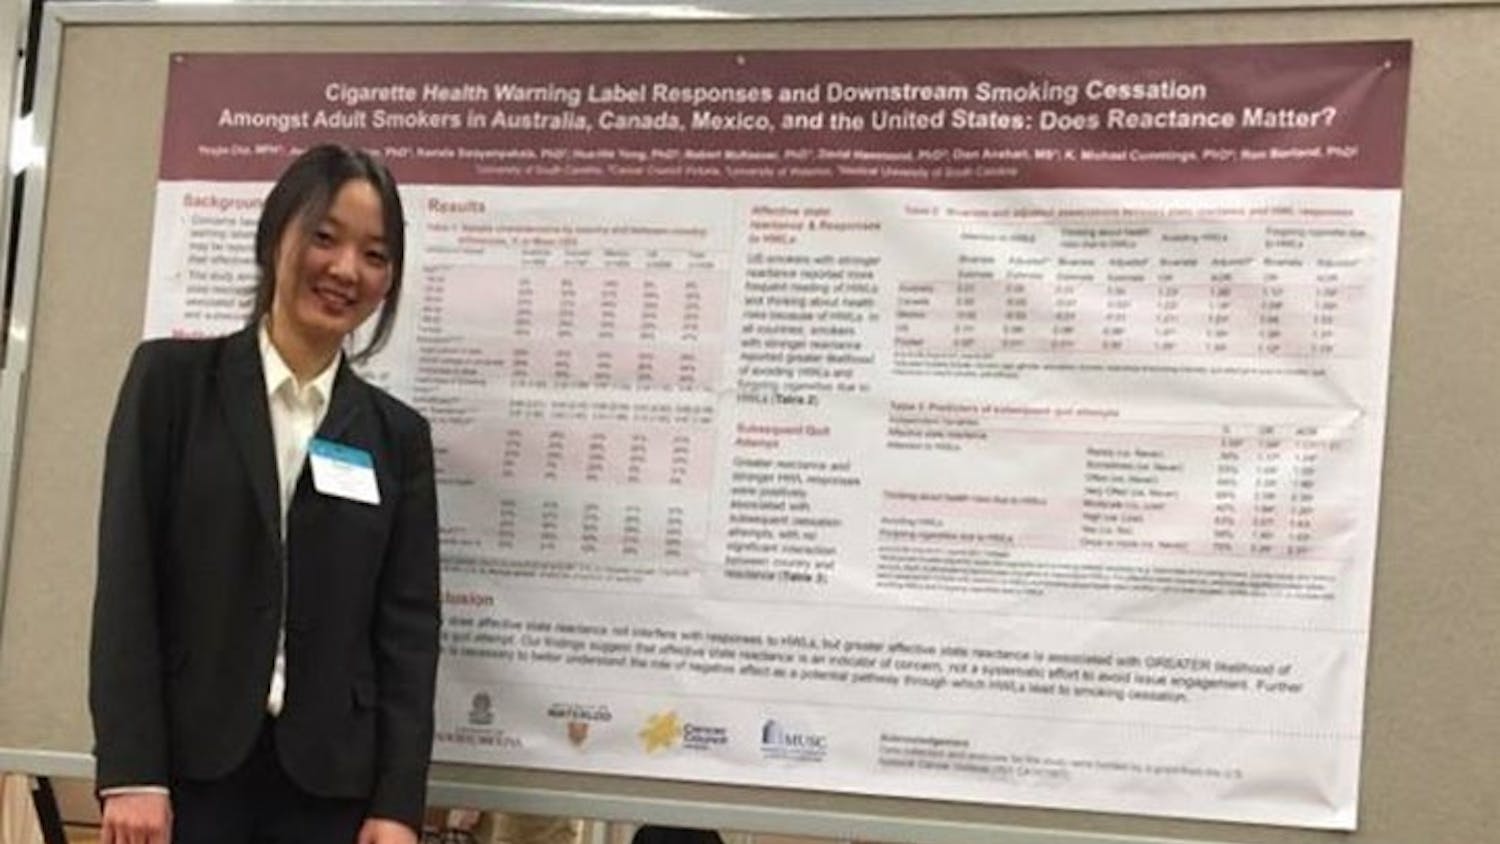 Yoojin Cho stands in front of her research presentation at the Society for Research on Nicotine and Tobacco conference.